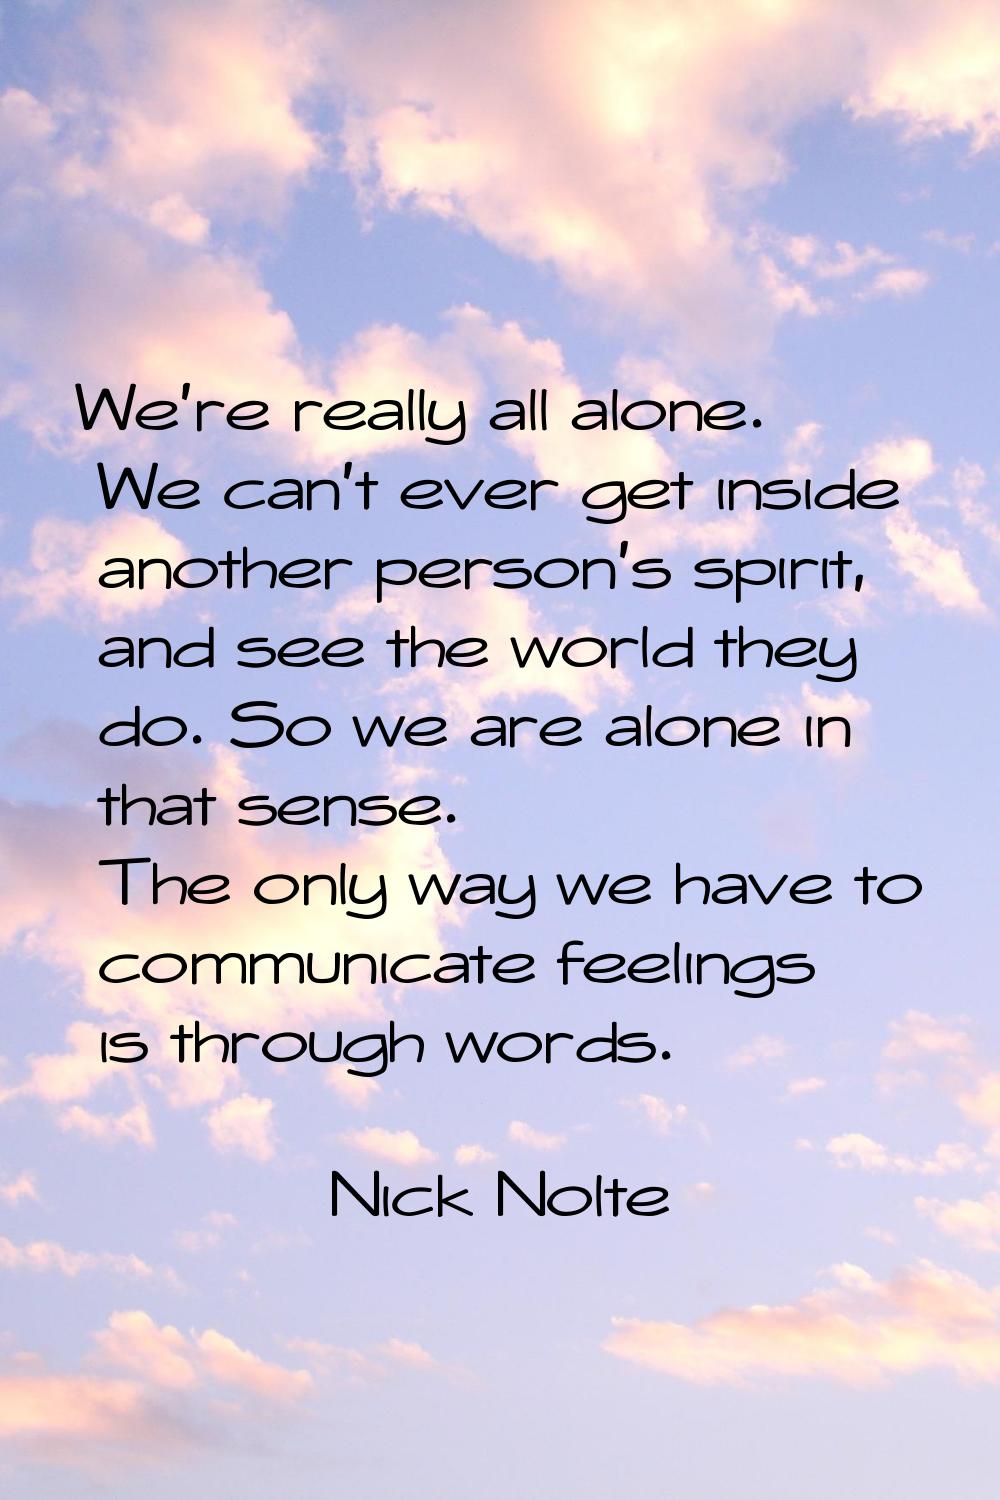 We're really all alone. We can't ever get inside another person's spirit, and see the world they do